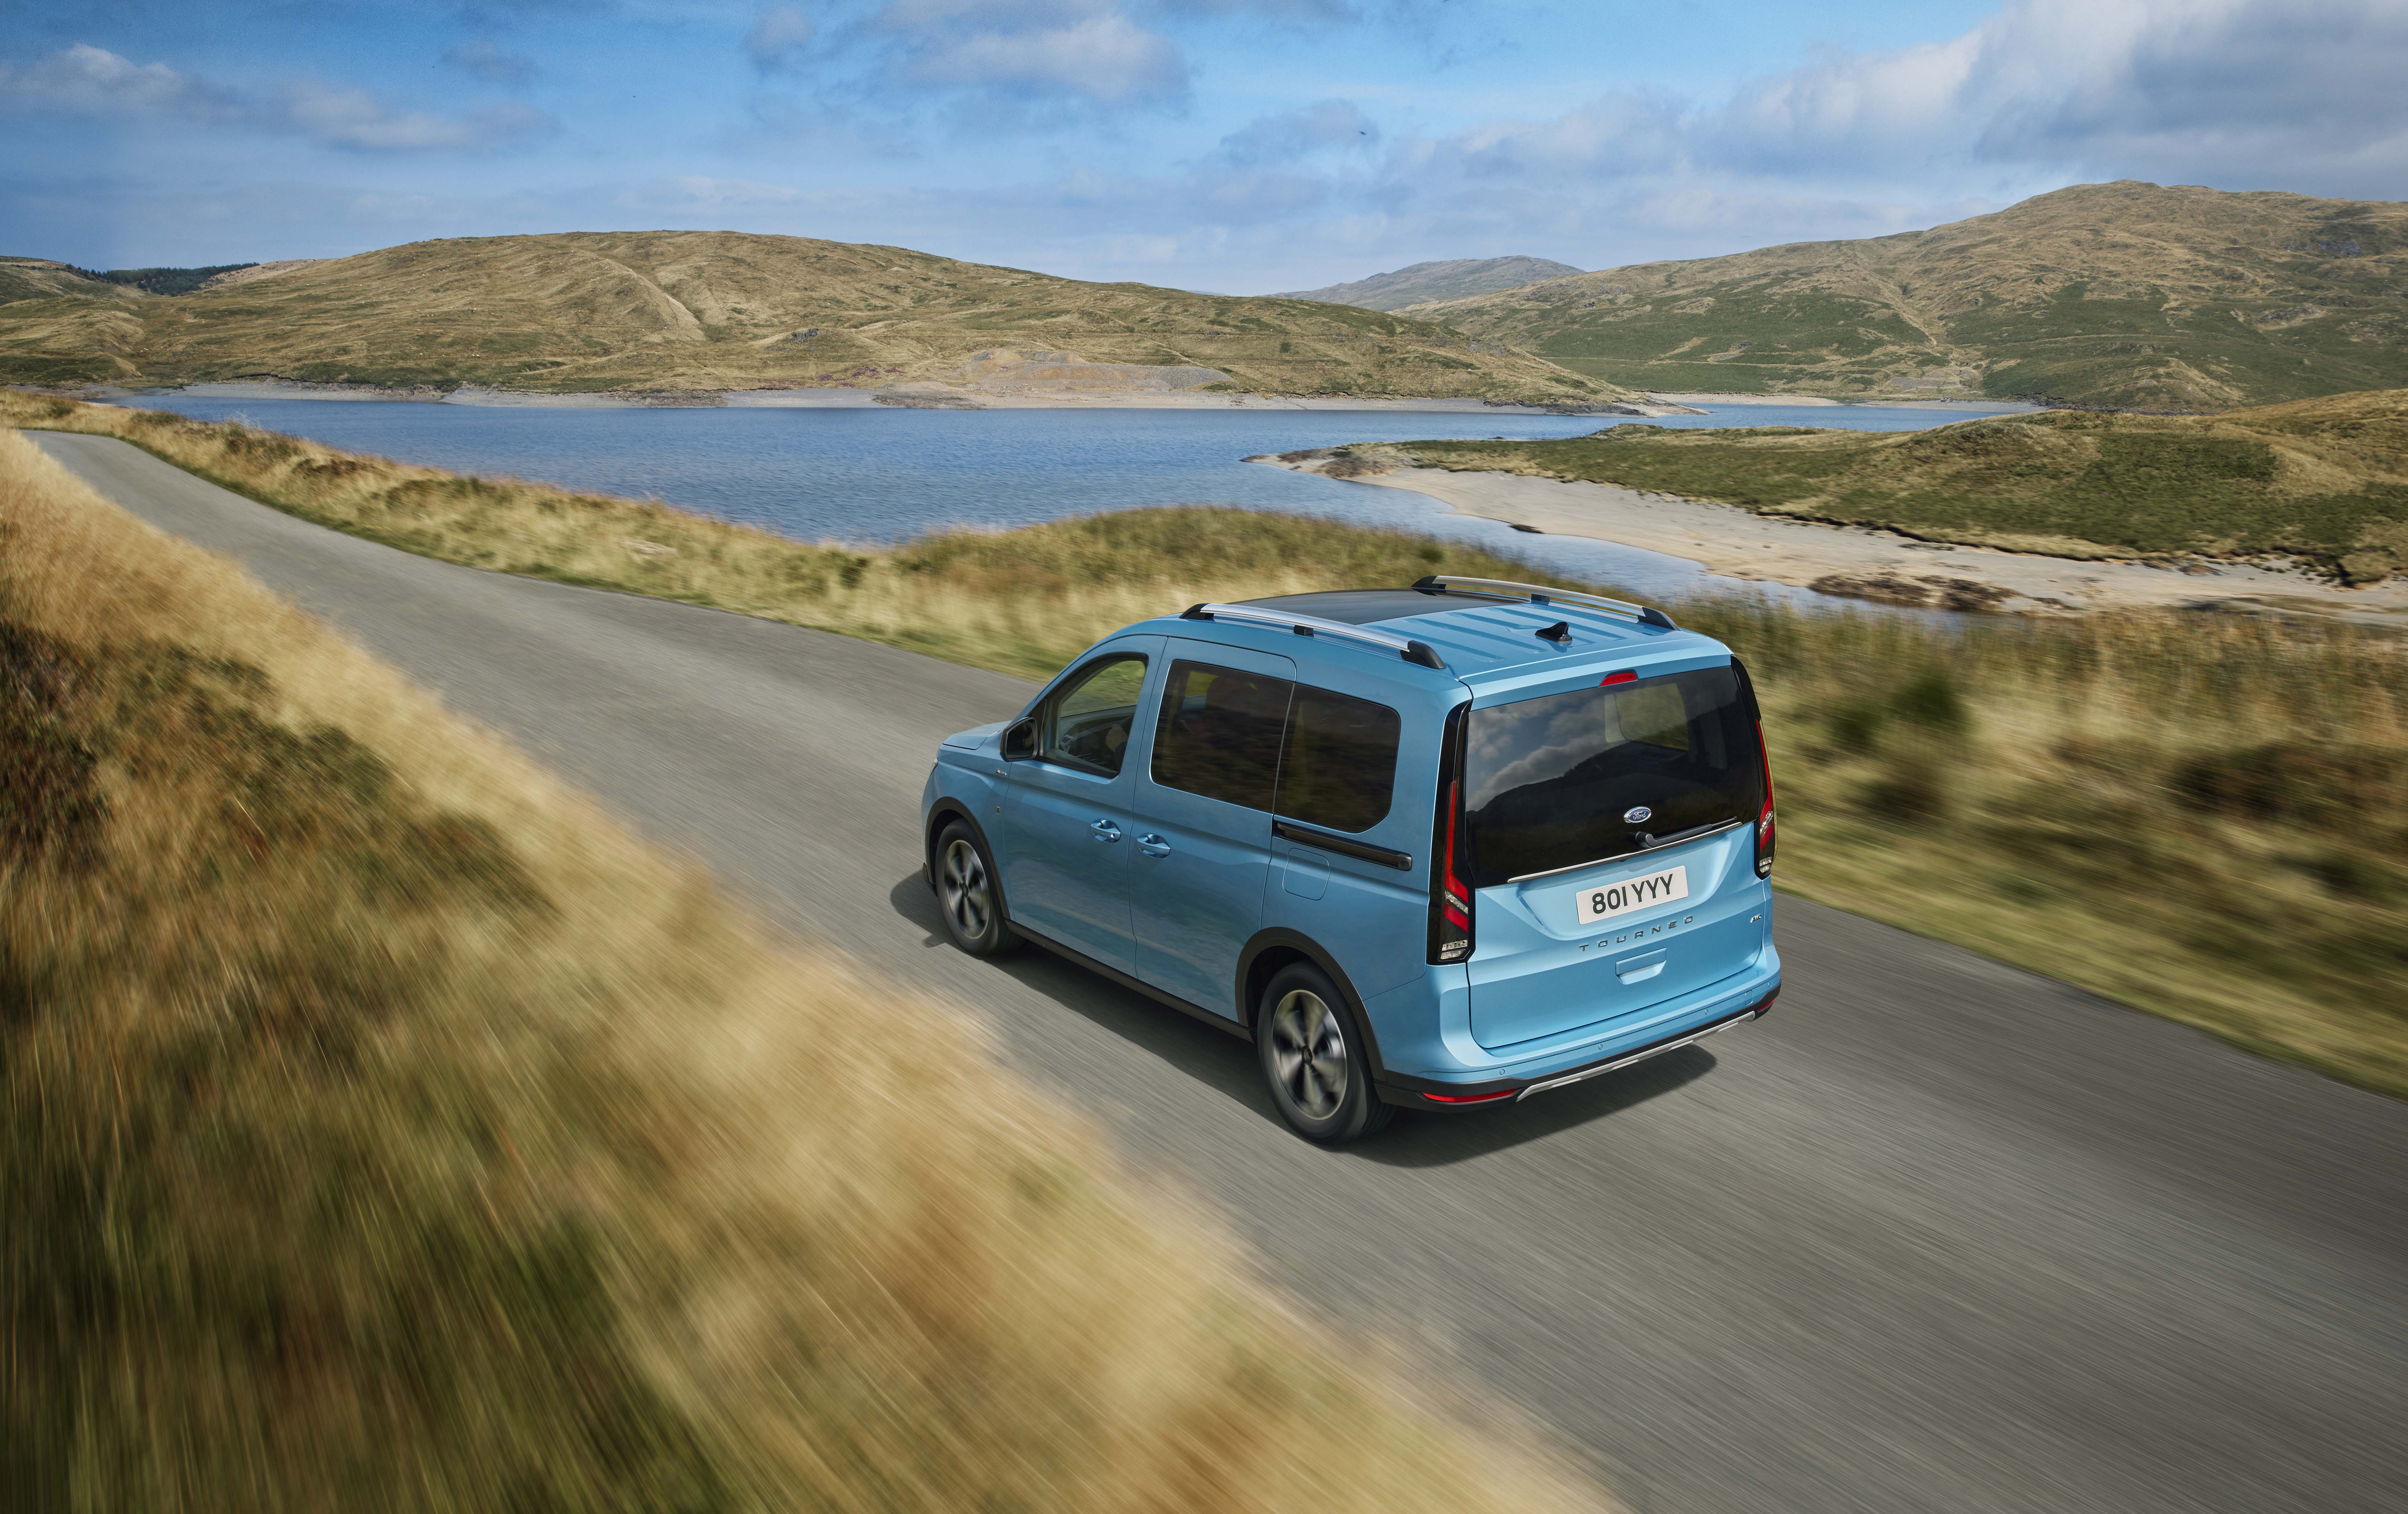 Ford Unveils All-New Tourneo Connect Multi-Activity Vehicle with